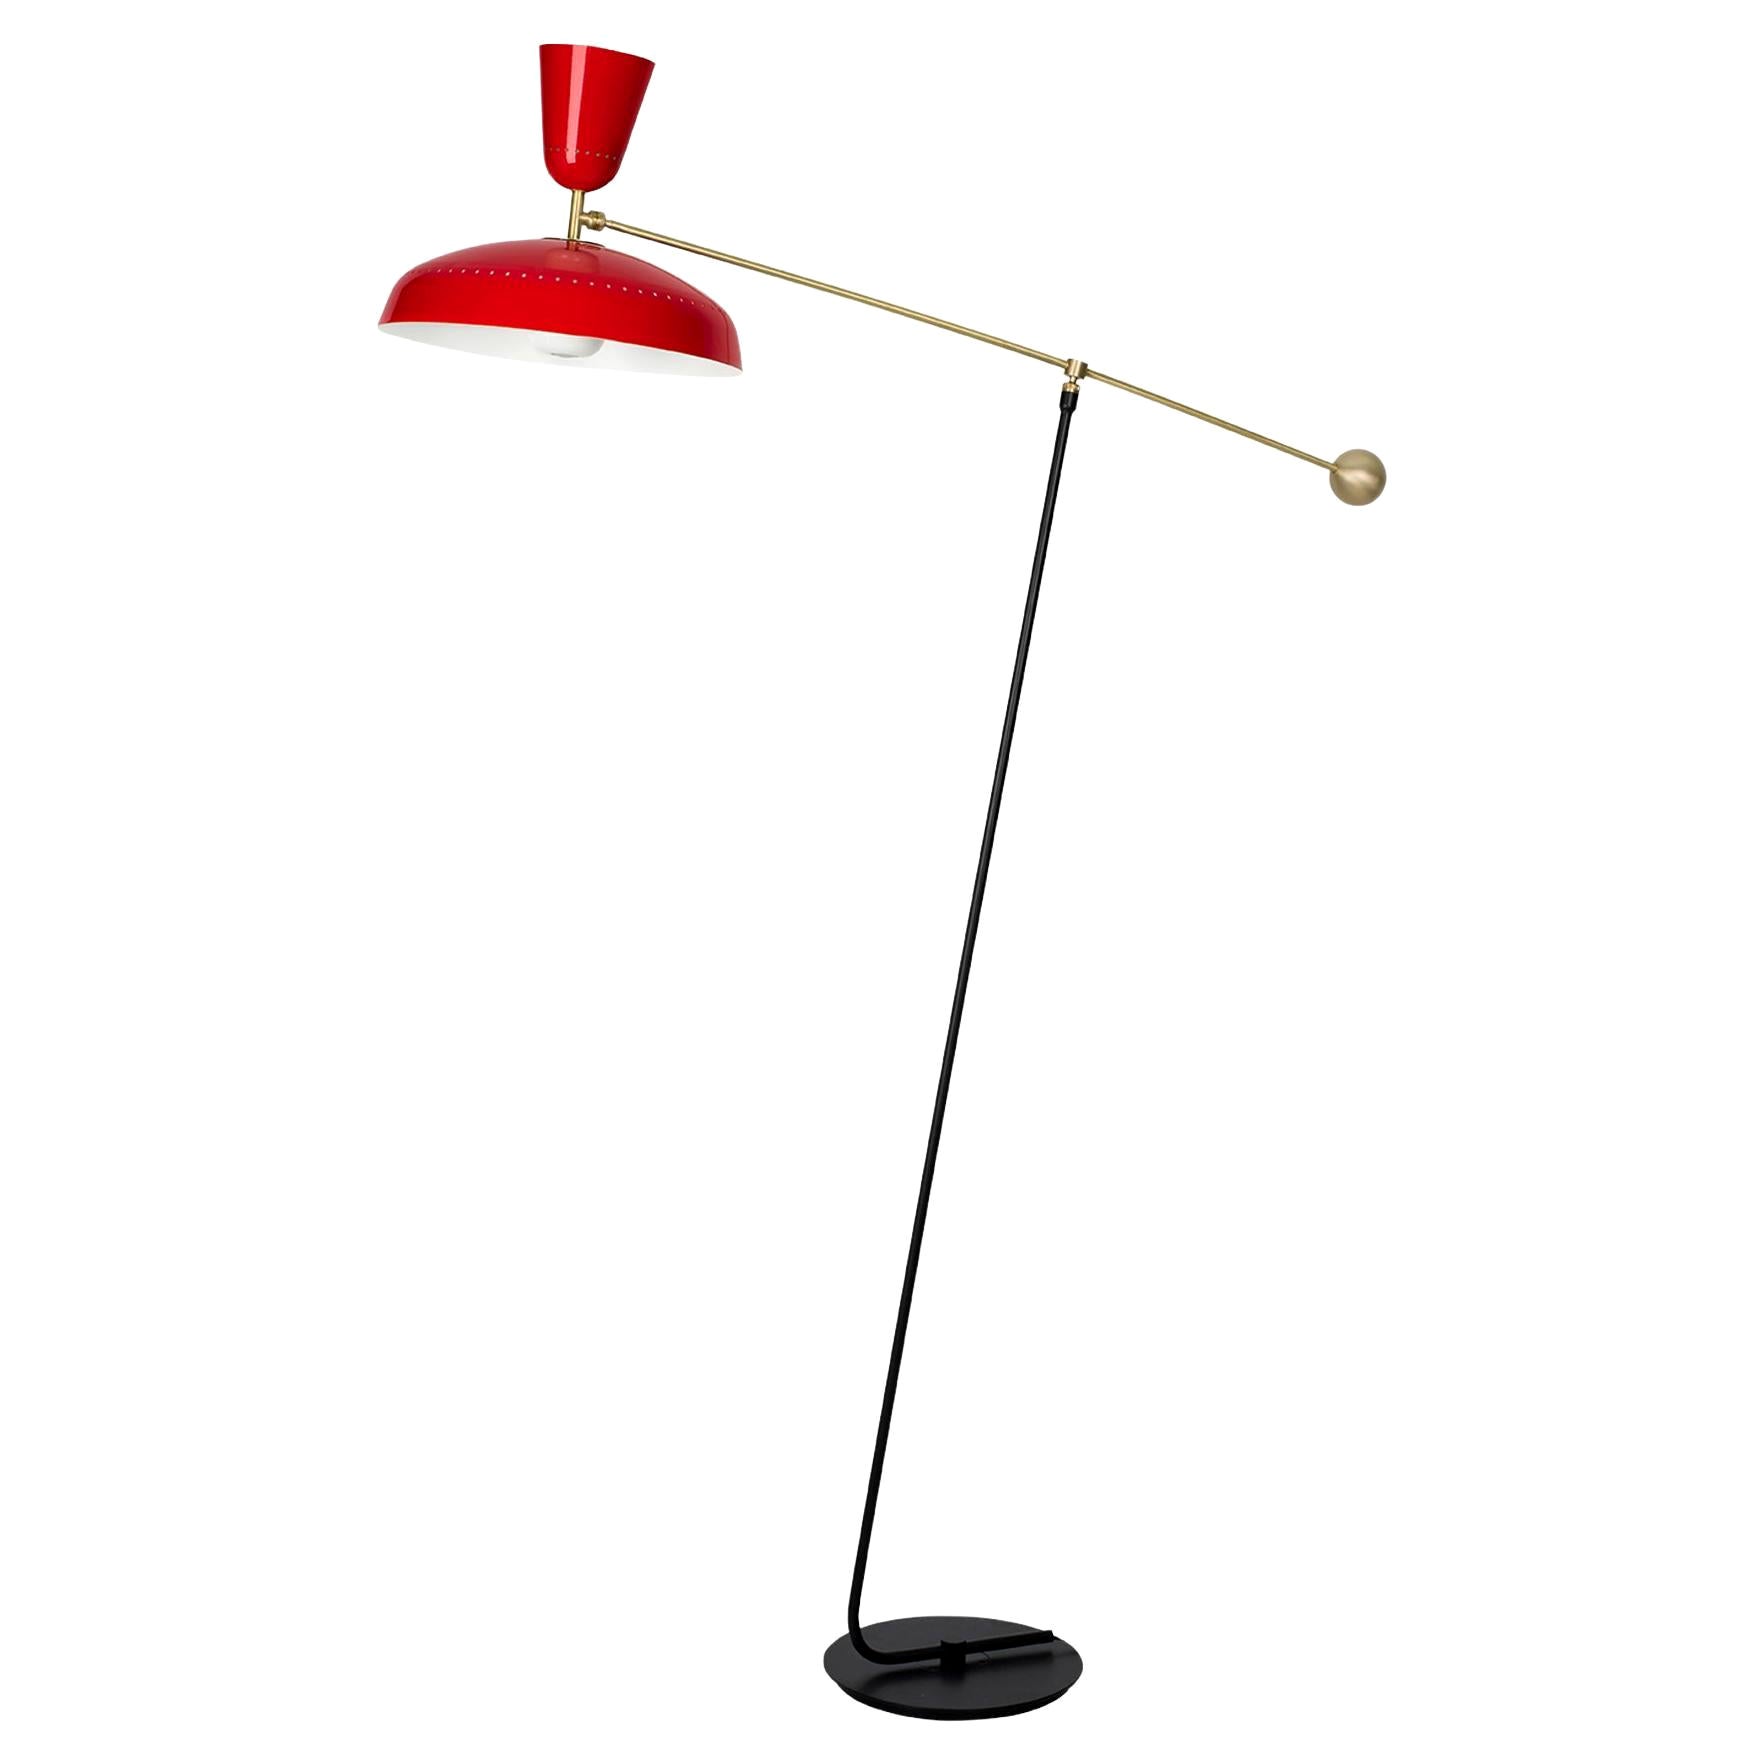 Large Pierre Guariche 'G1' Floor Lamp for Sammode Studio in Red For Sale